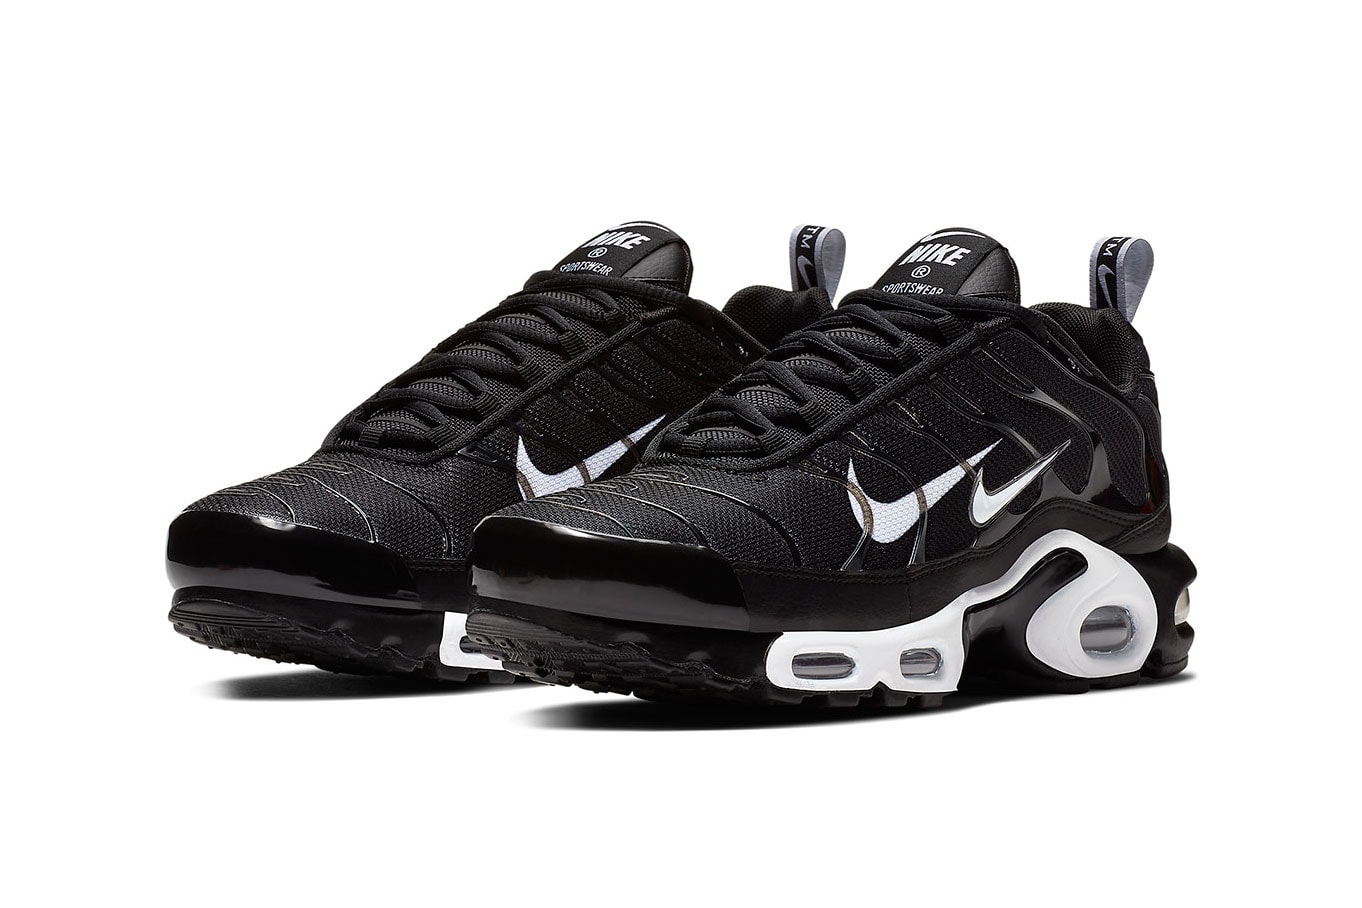 Nike Air Max Plus "Overbranded" Double Swoosh black white colorway sneaker series pack logo price info release date